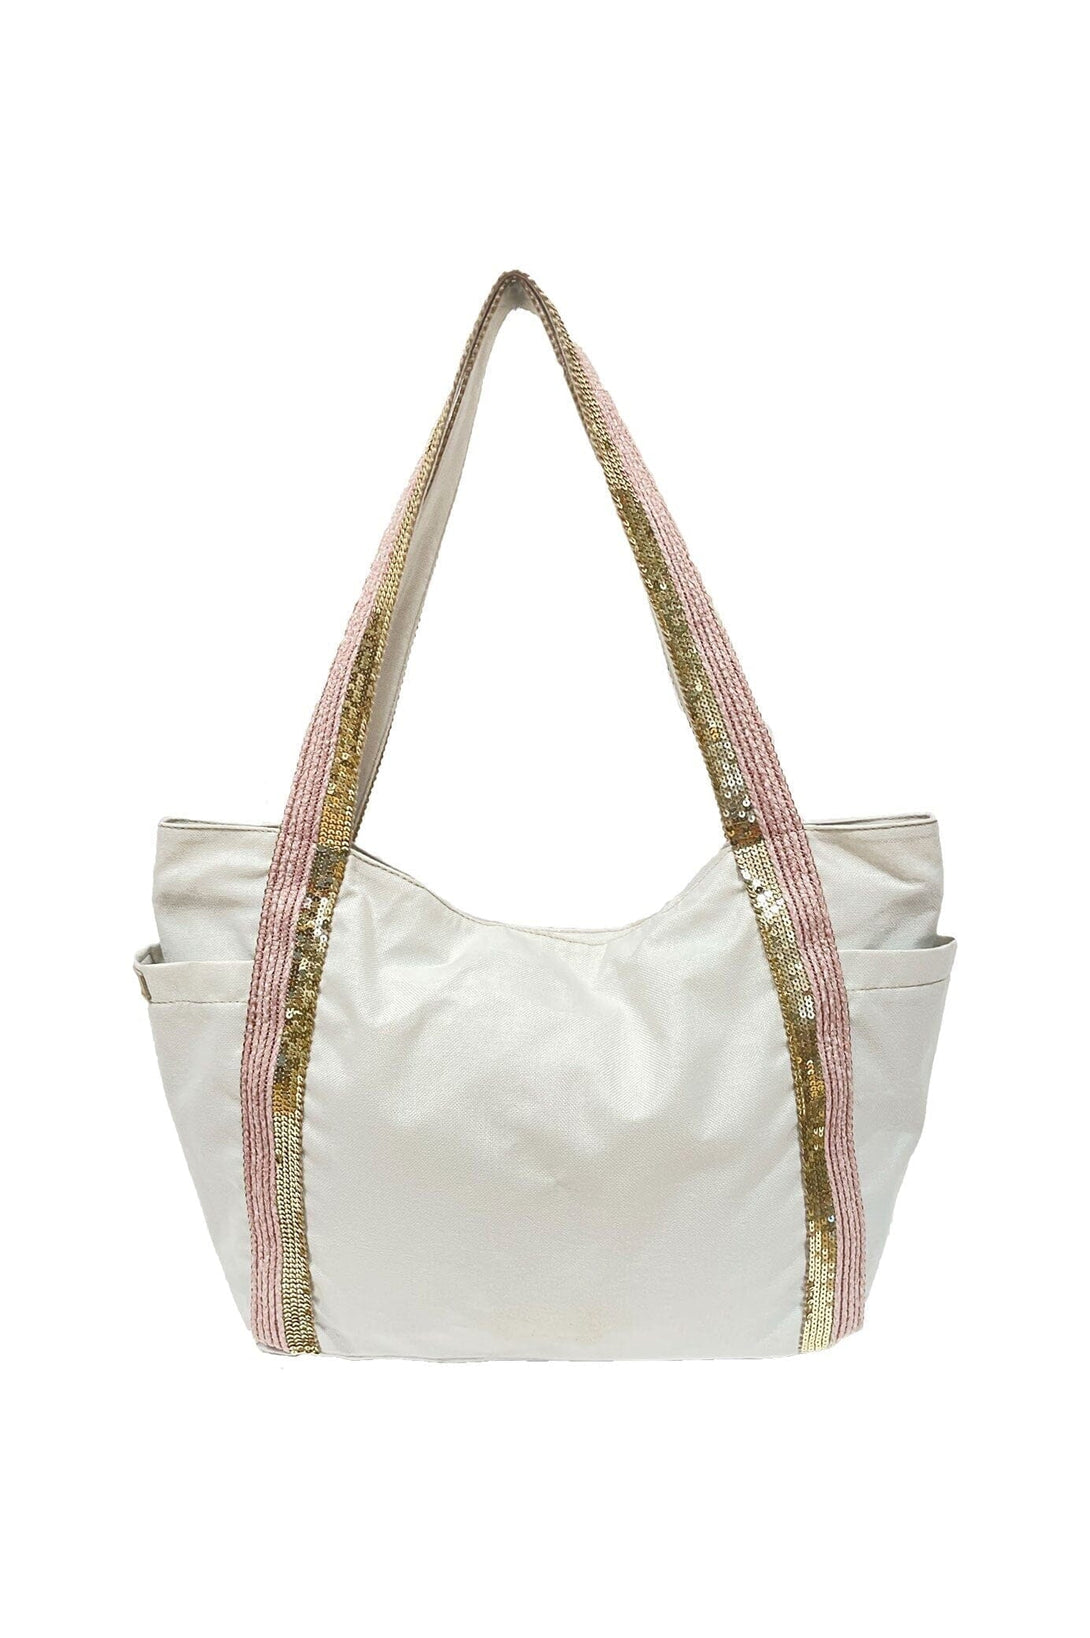 Laura Sequin Tote Bag White and Rose Handbags